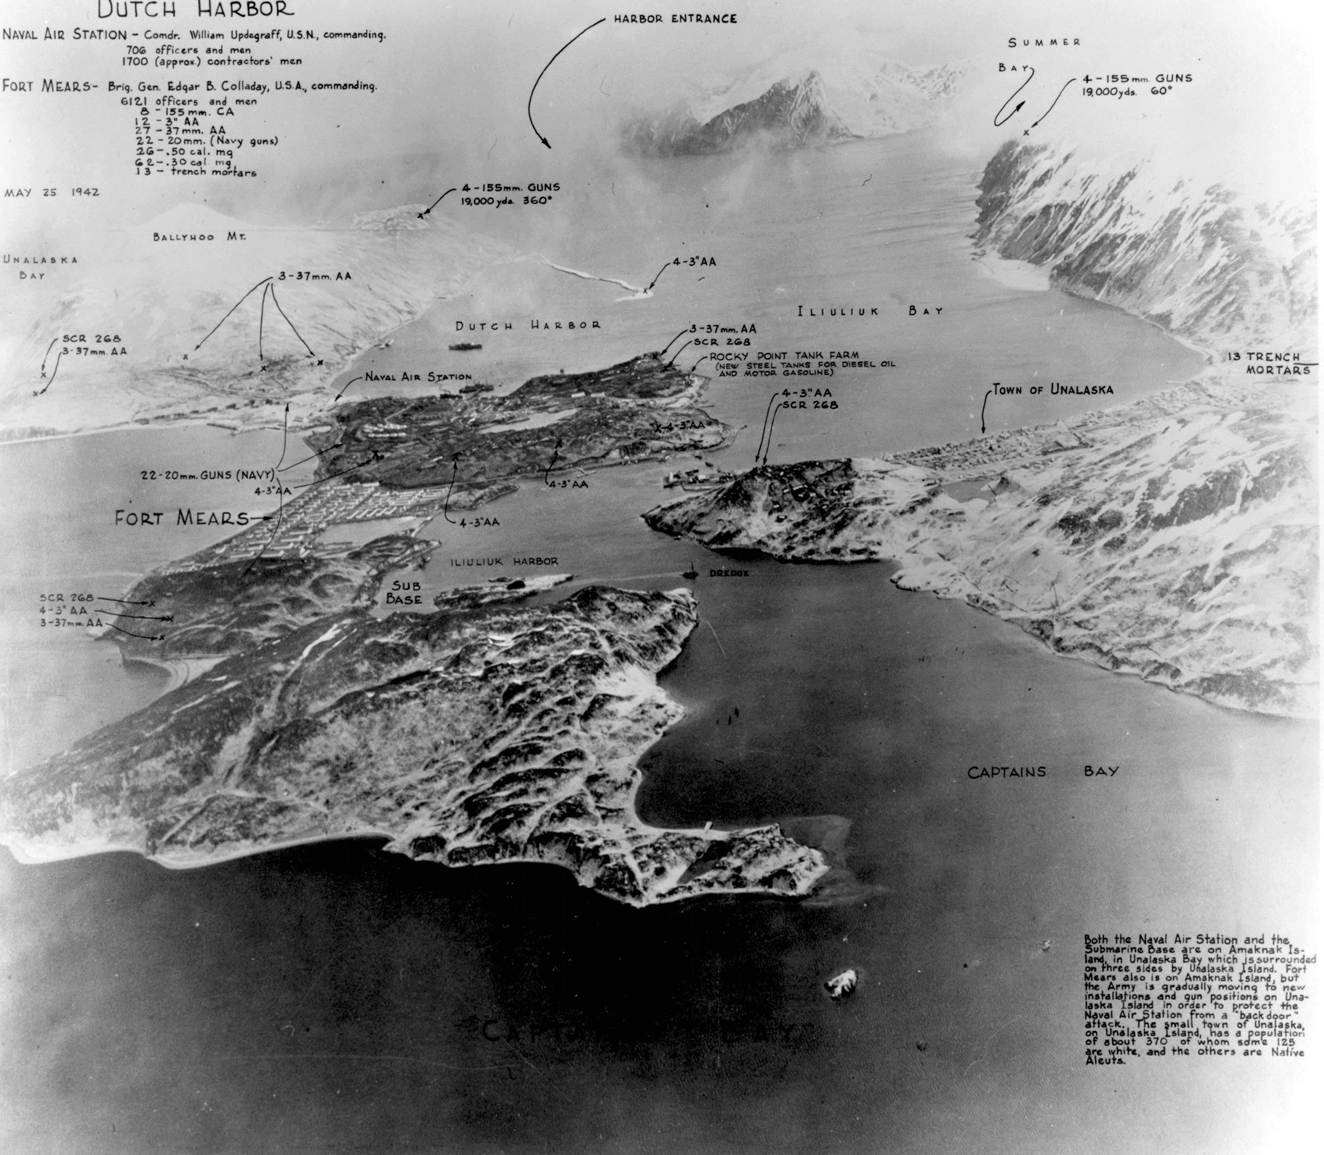 black and white aerial photo of islands and water with handwritten annotations